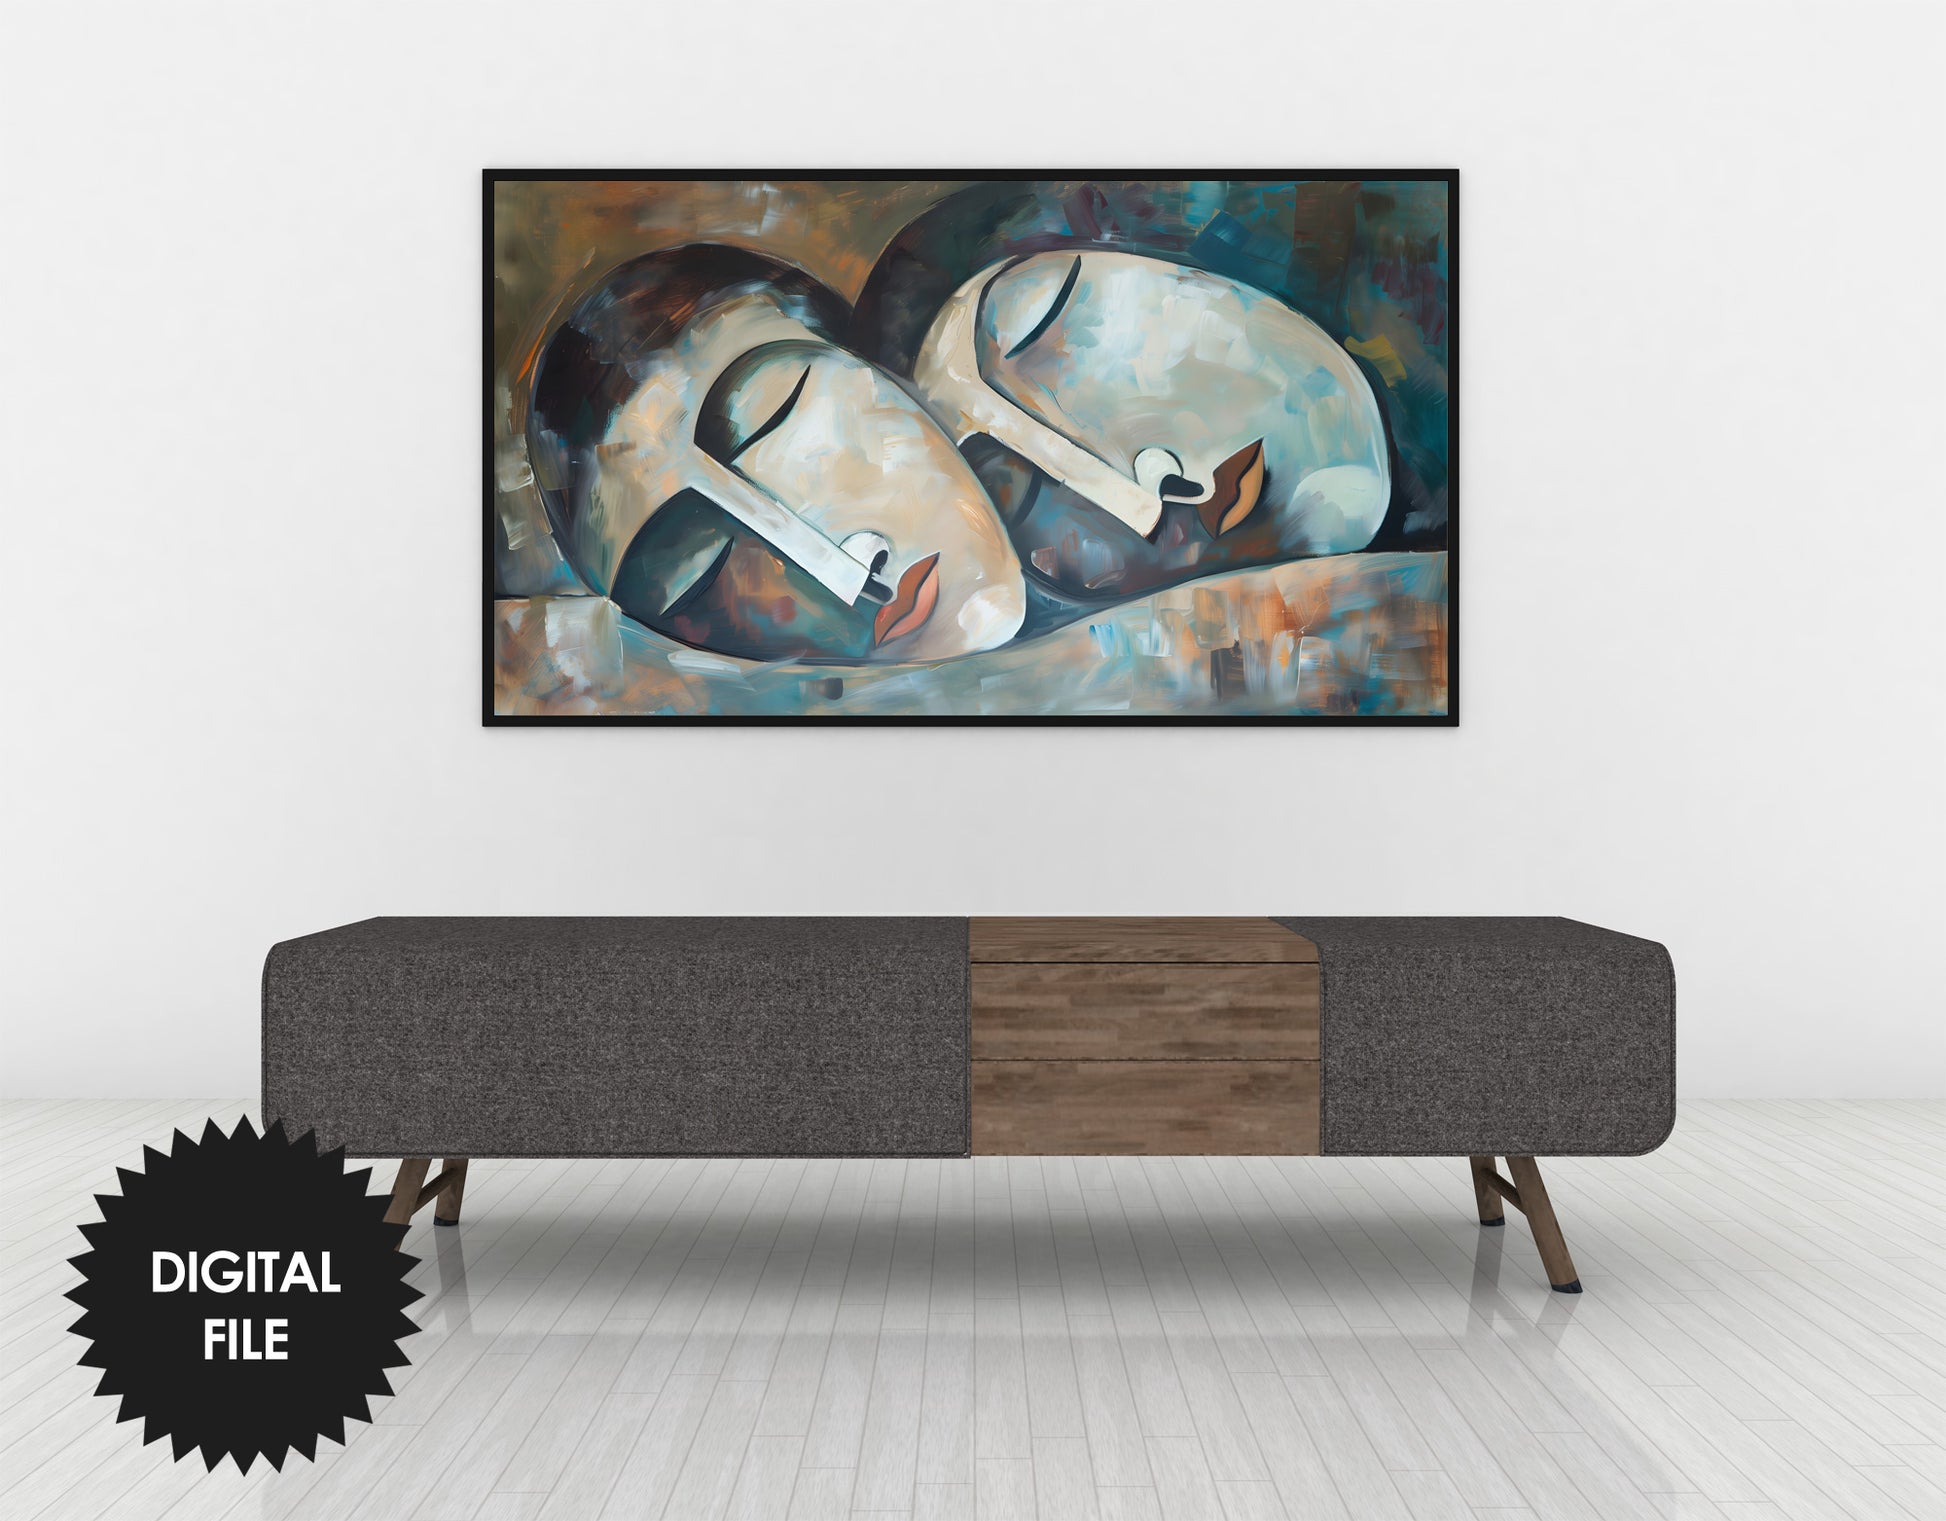 Frame TV Art, Sleeping Couple Abstract Art, Cool Tones, Cubist Oil Painting Preview on Samsung Wall mount TV